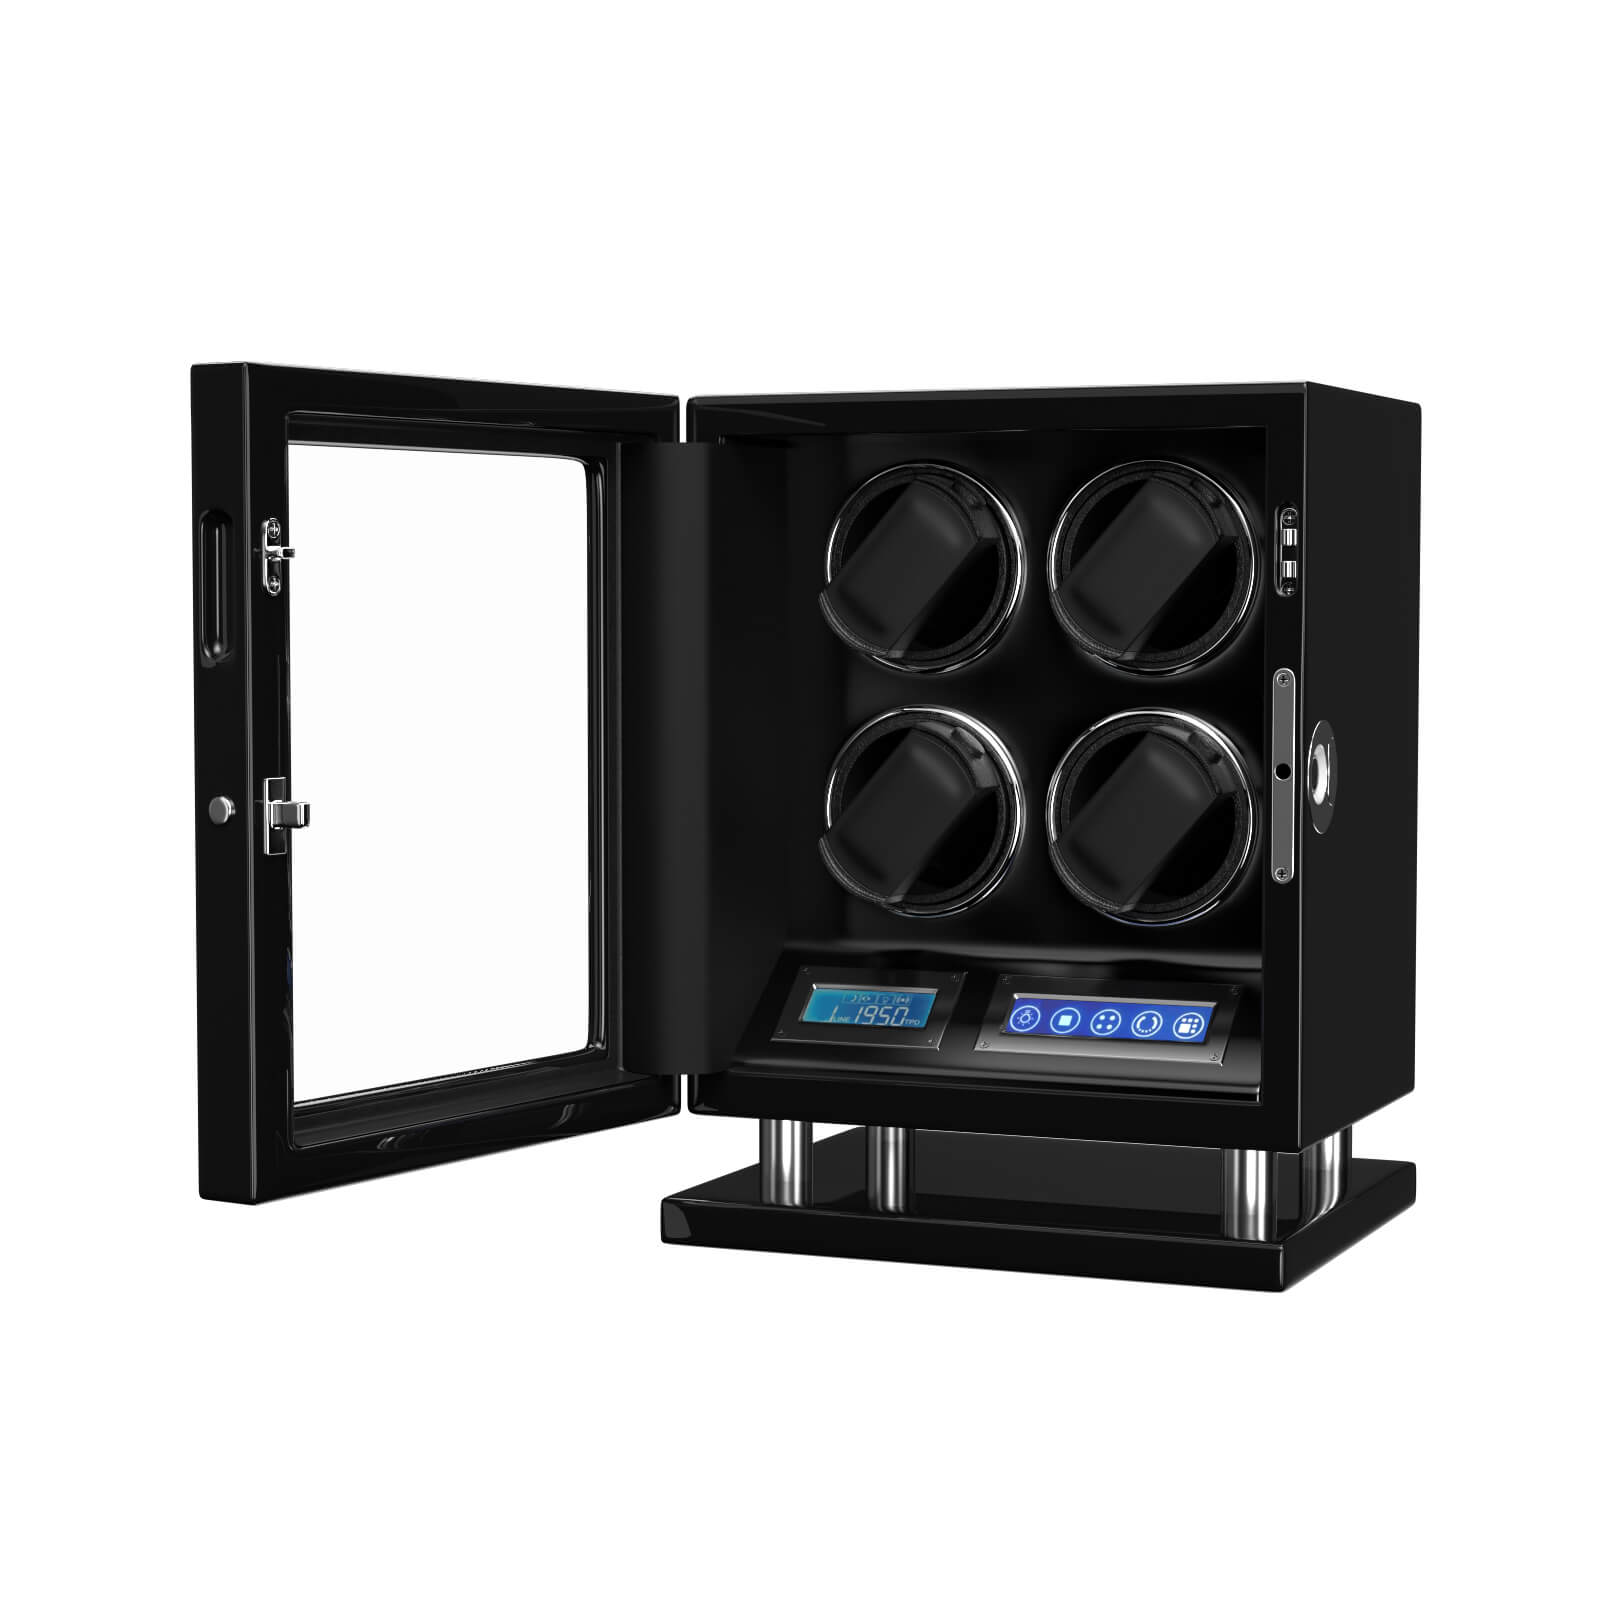 Fingerprint Unlock Watch Winder for 4 Automatic Watches with Blue LED Light Japanese Motors